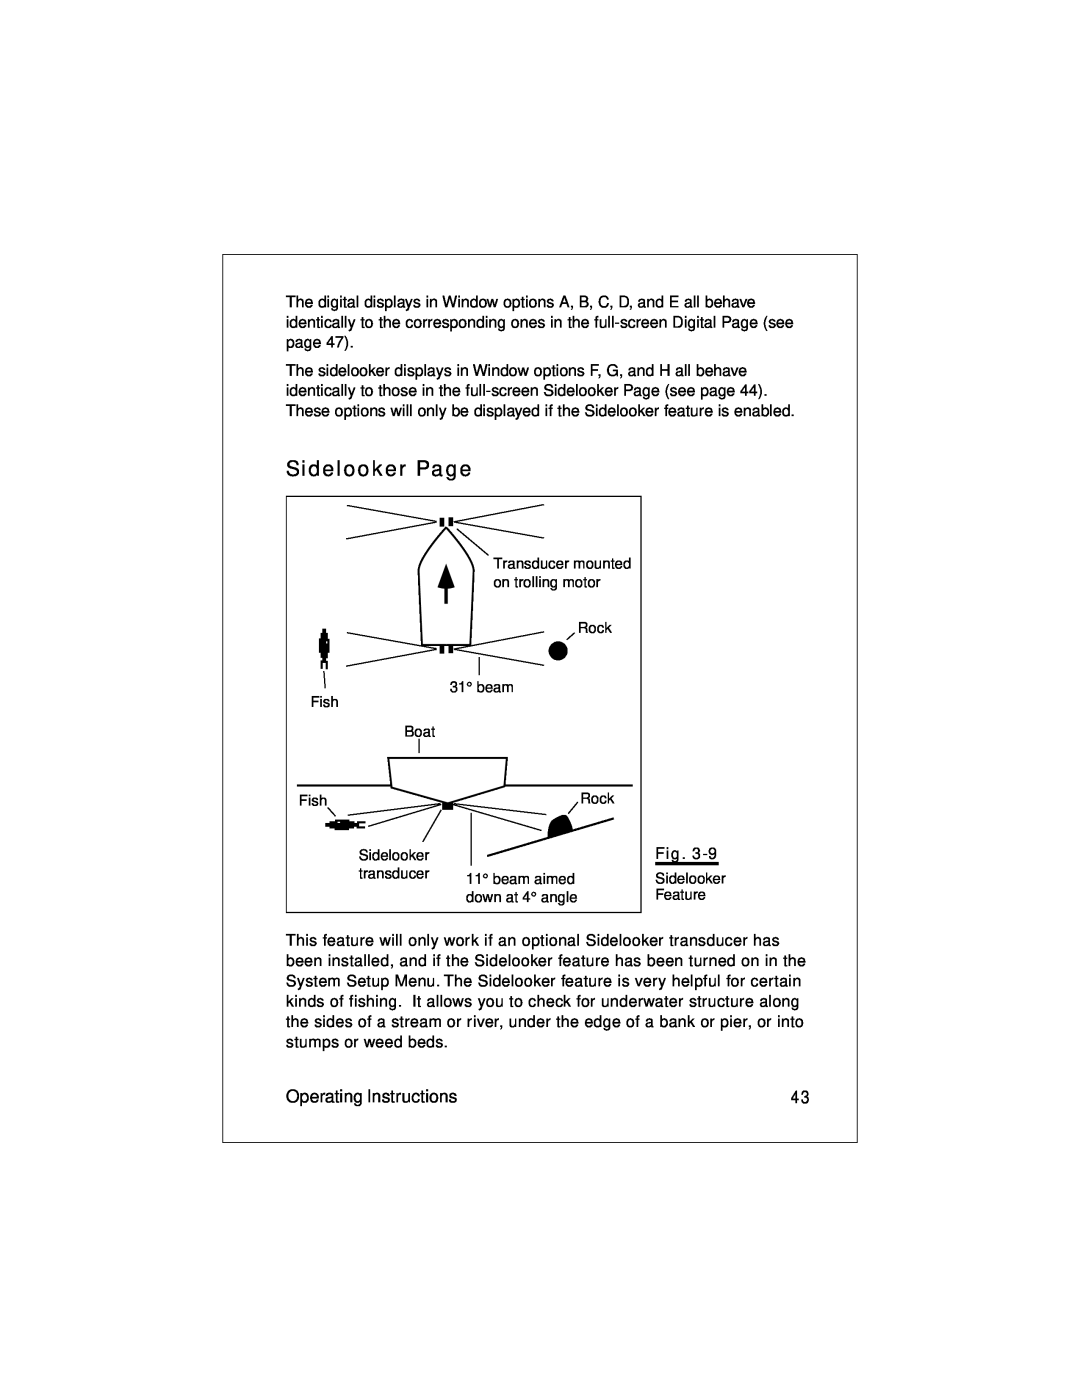 Raymarine L470 instruction manual Sidelooker Page, Operating Instructions 